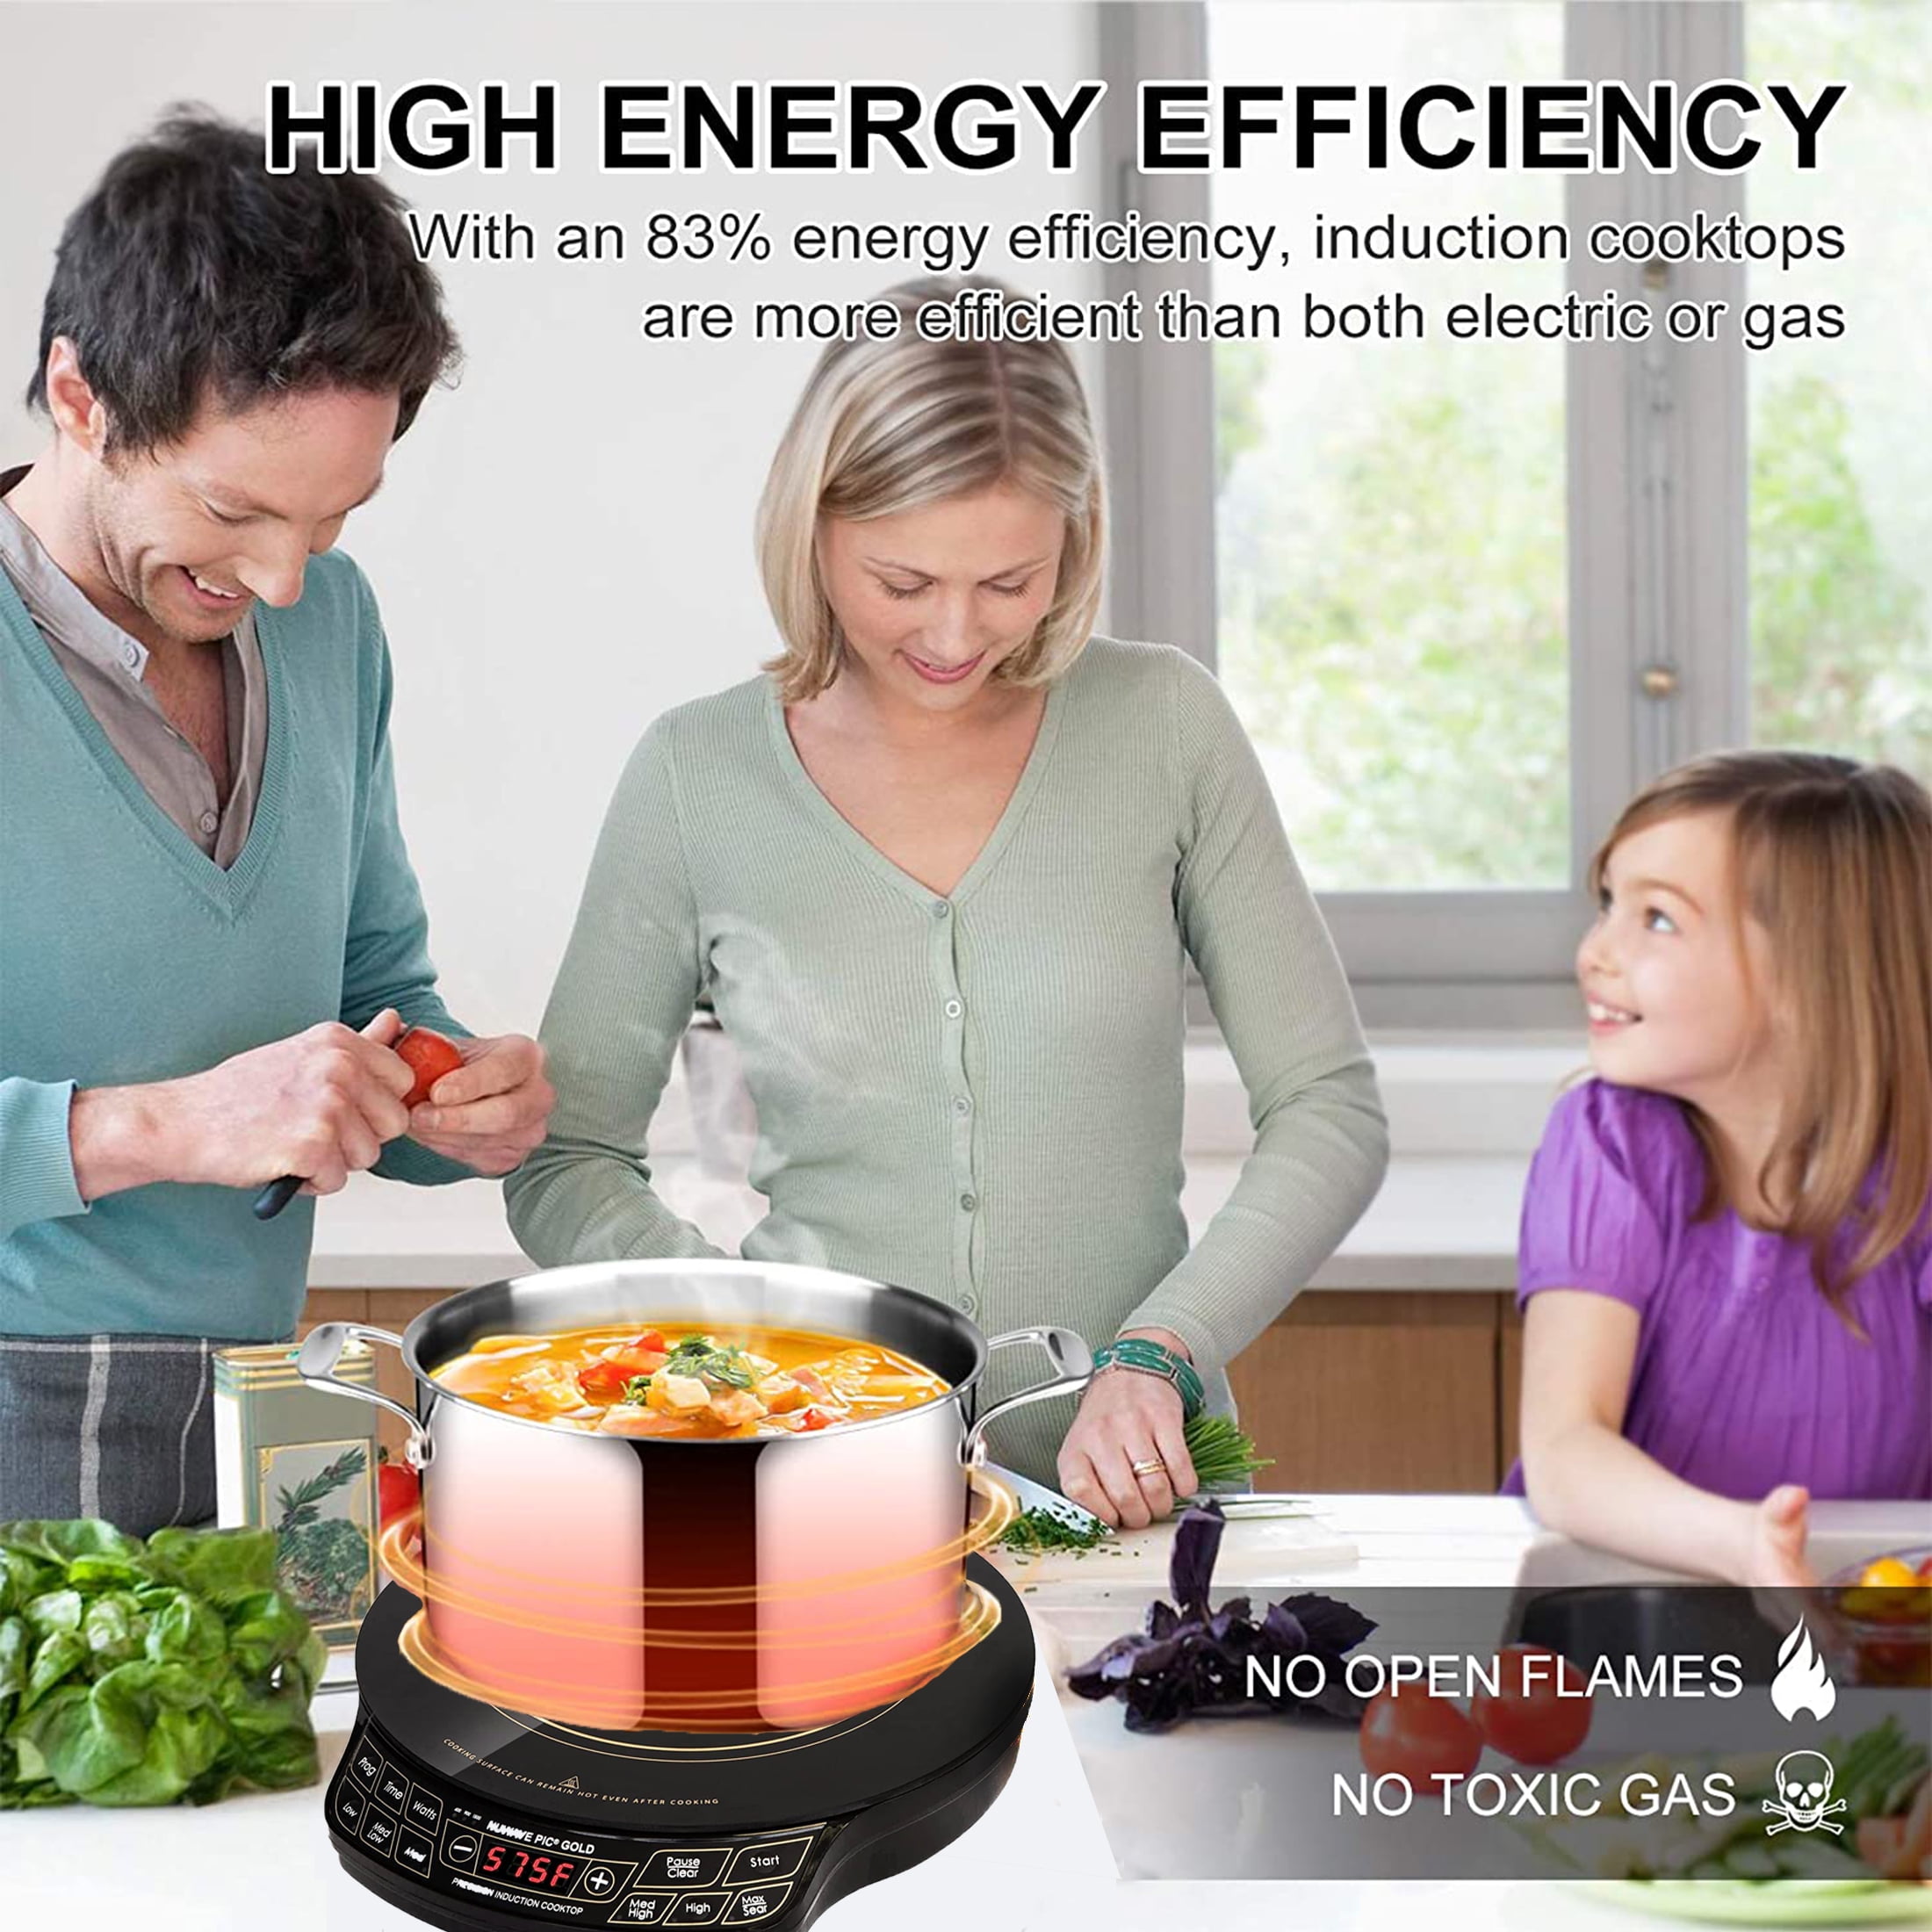  NuWave PIC Pro Highest Powered Induction Cooktop 1800W